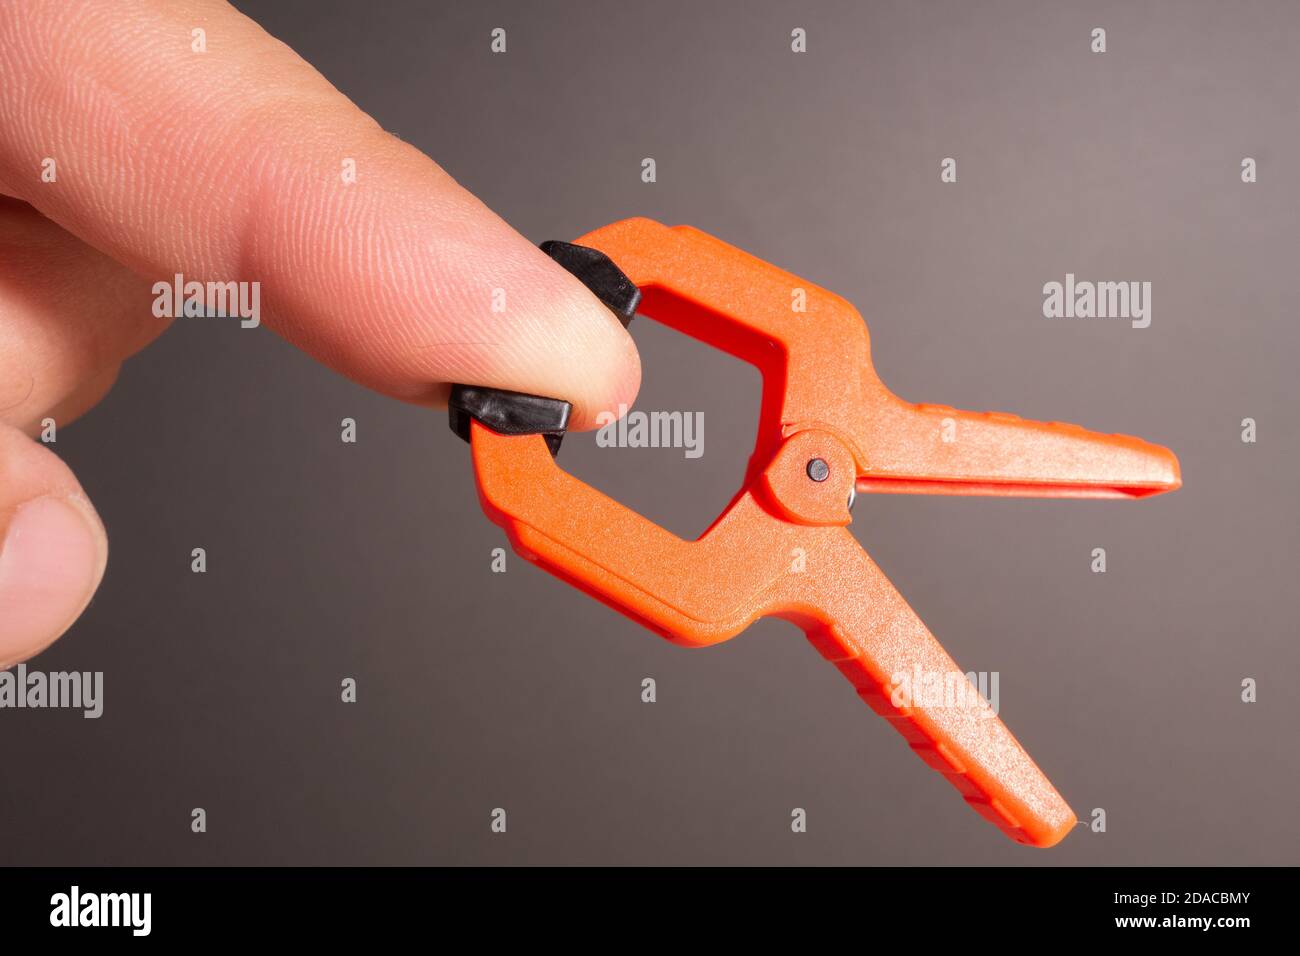 Clothespins, carpentry clamps of orange color lie on a wooden table. A pyramid in the form of a robot made of clamps. Stock Photo